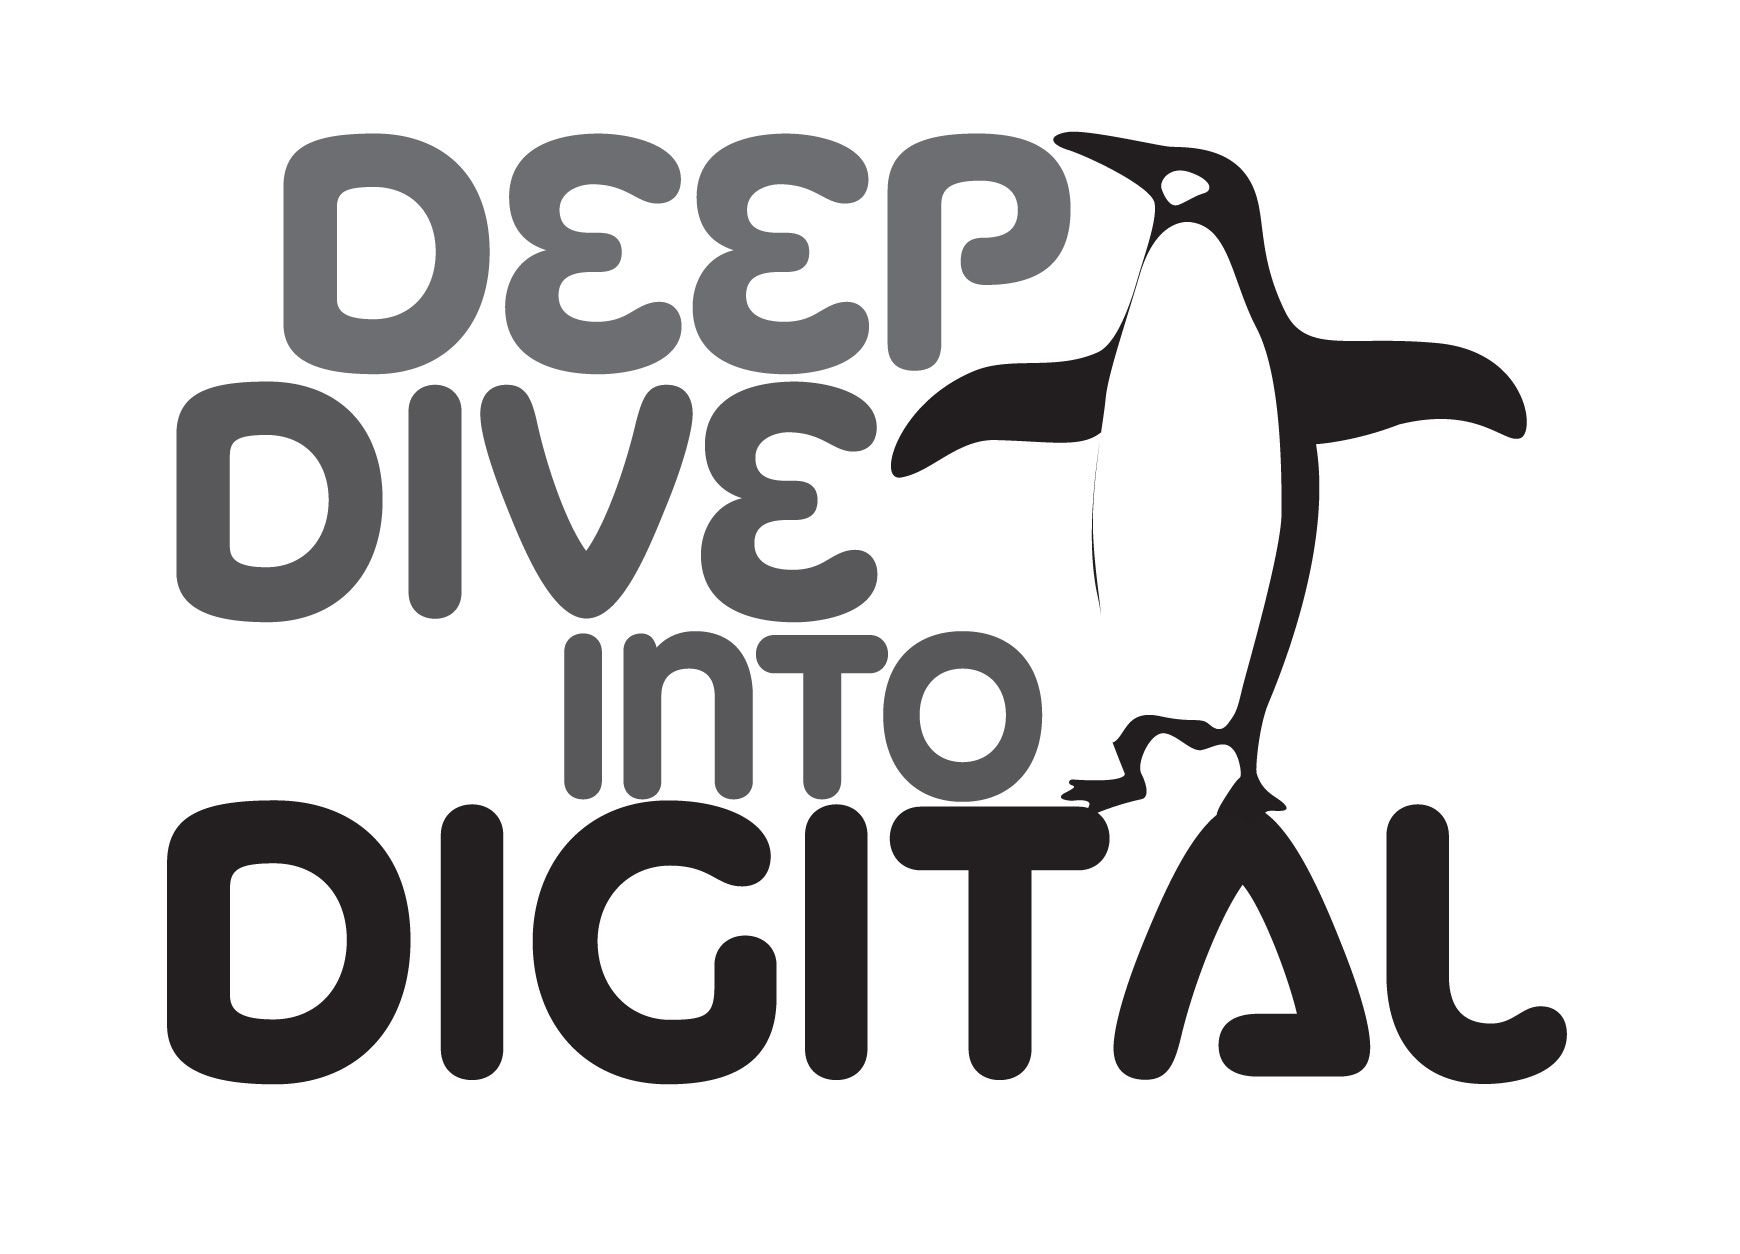 Penguin looks at taking a Deep Dive into Digital